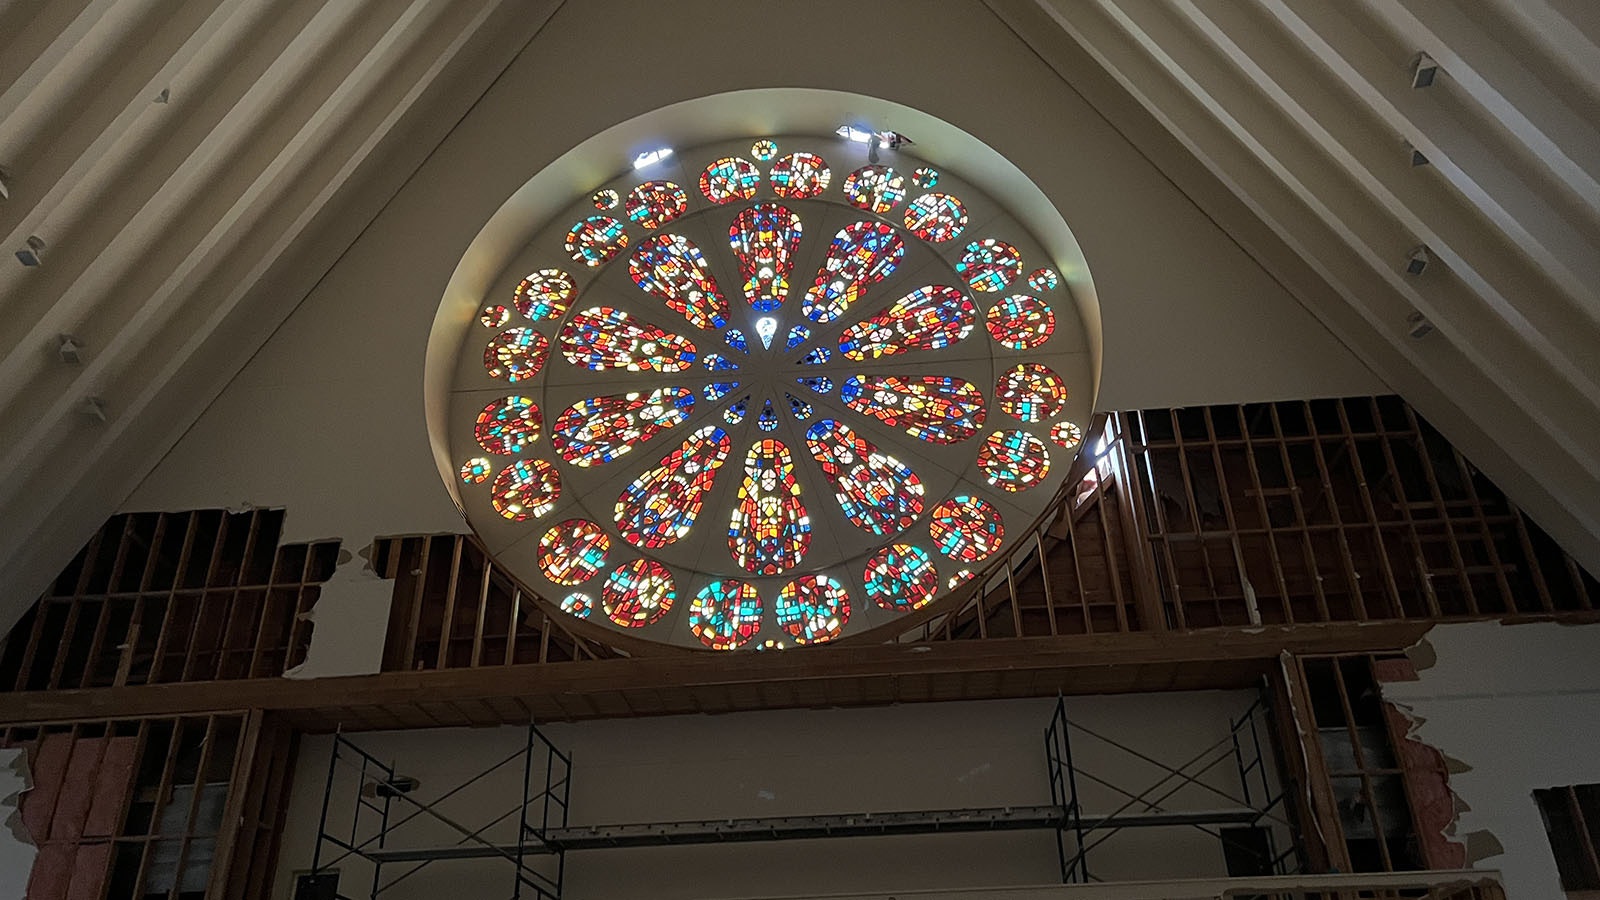 A huge, round window was a notable feature of the soaring sanctuary of the First United Methodist Church in Laramie. As the sanctuary is demolished, parts of the window could be salvaged to make wind chimes and Christmas ornaments.